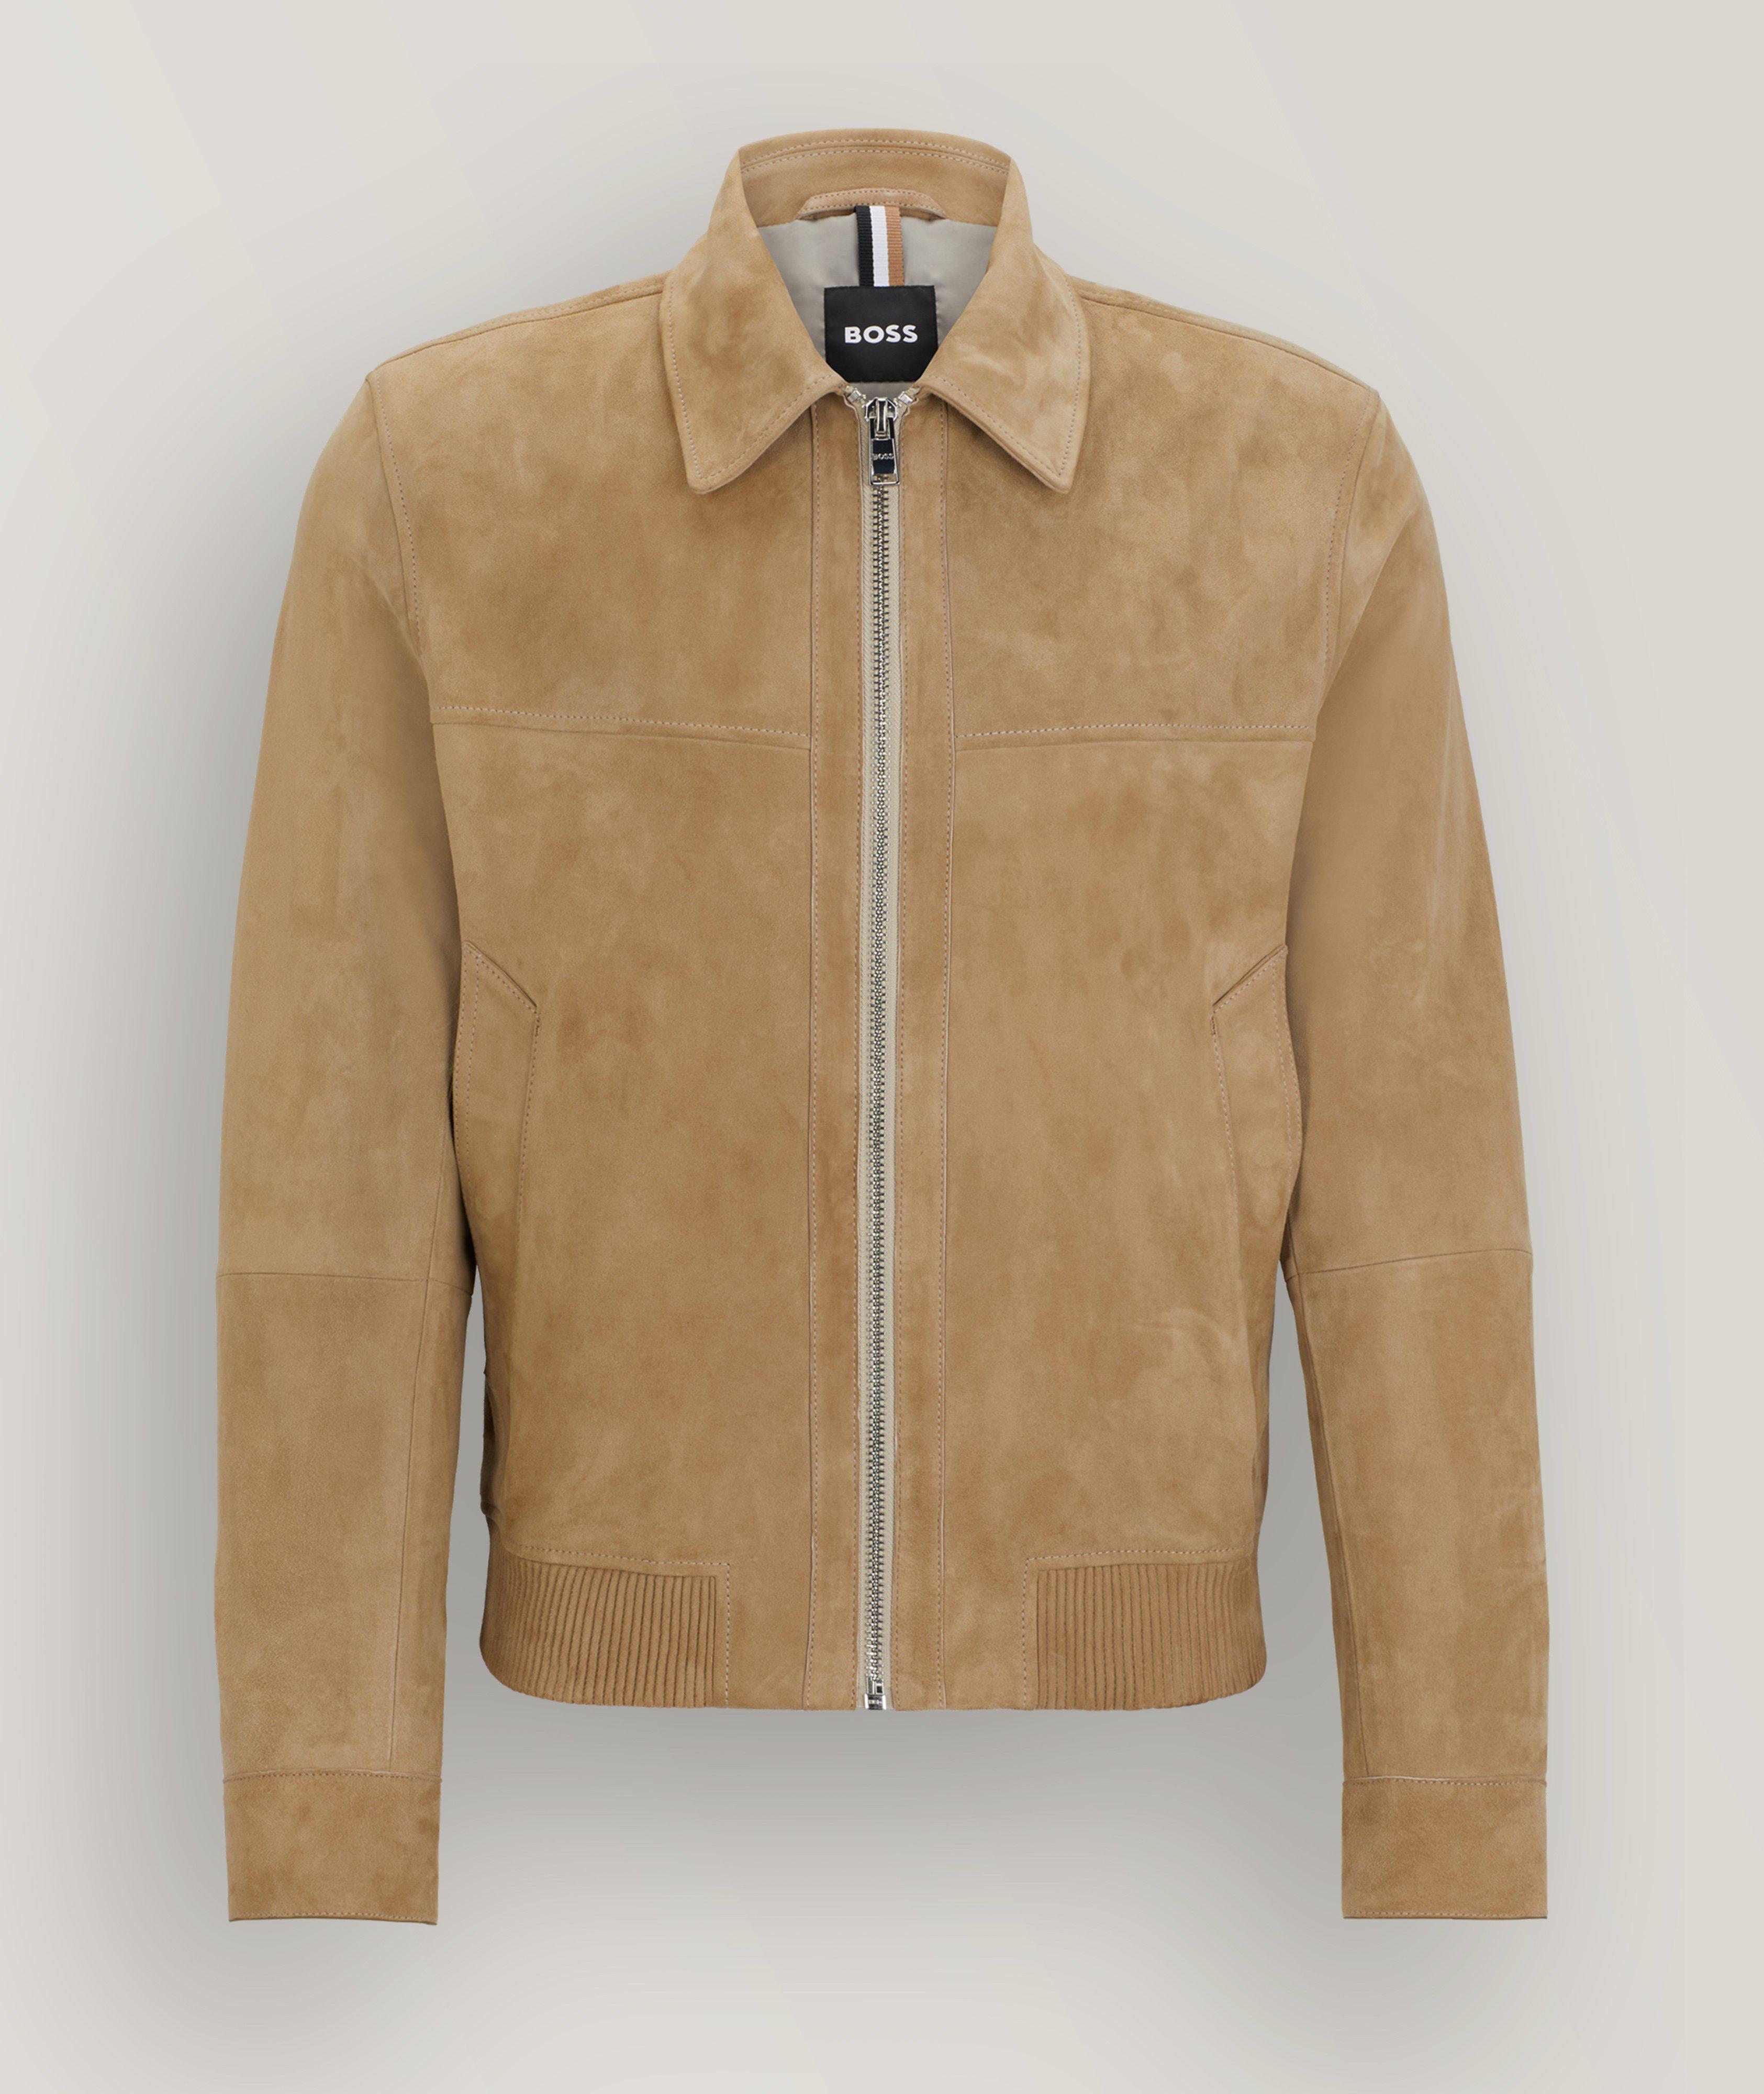 HUGO - Hybrid jacket in shearling suede and nappa leather